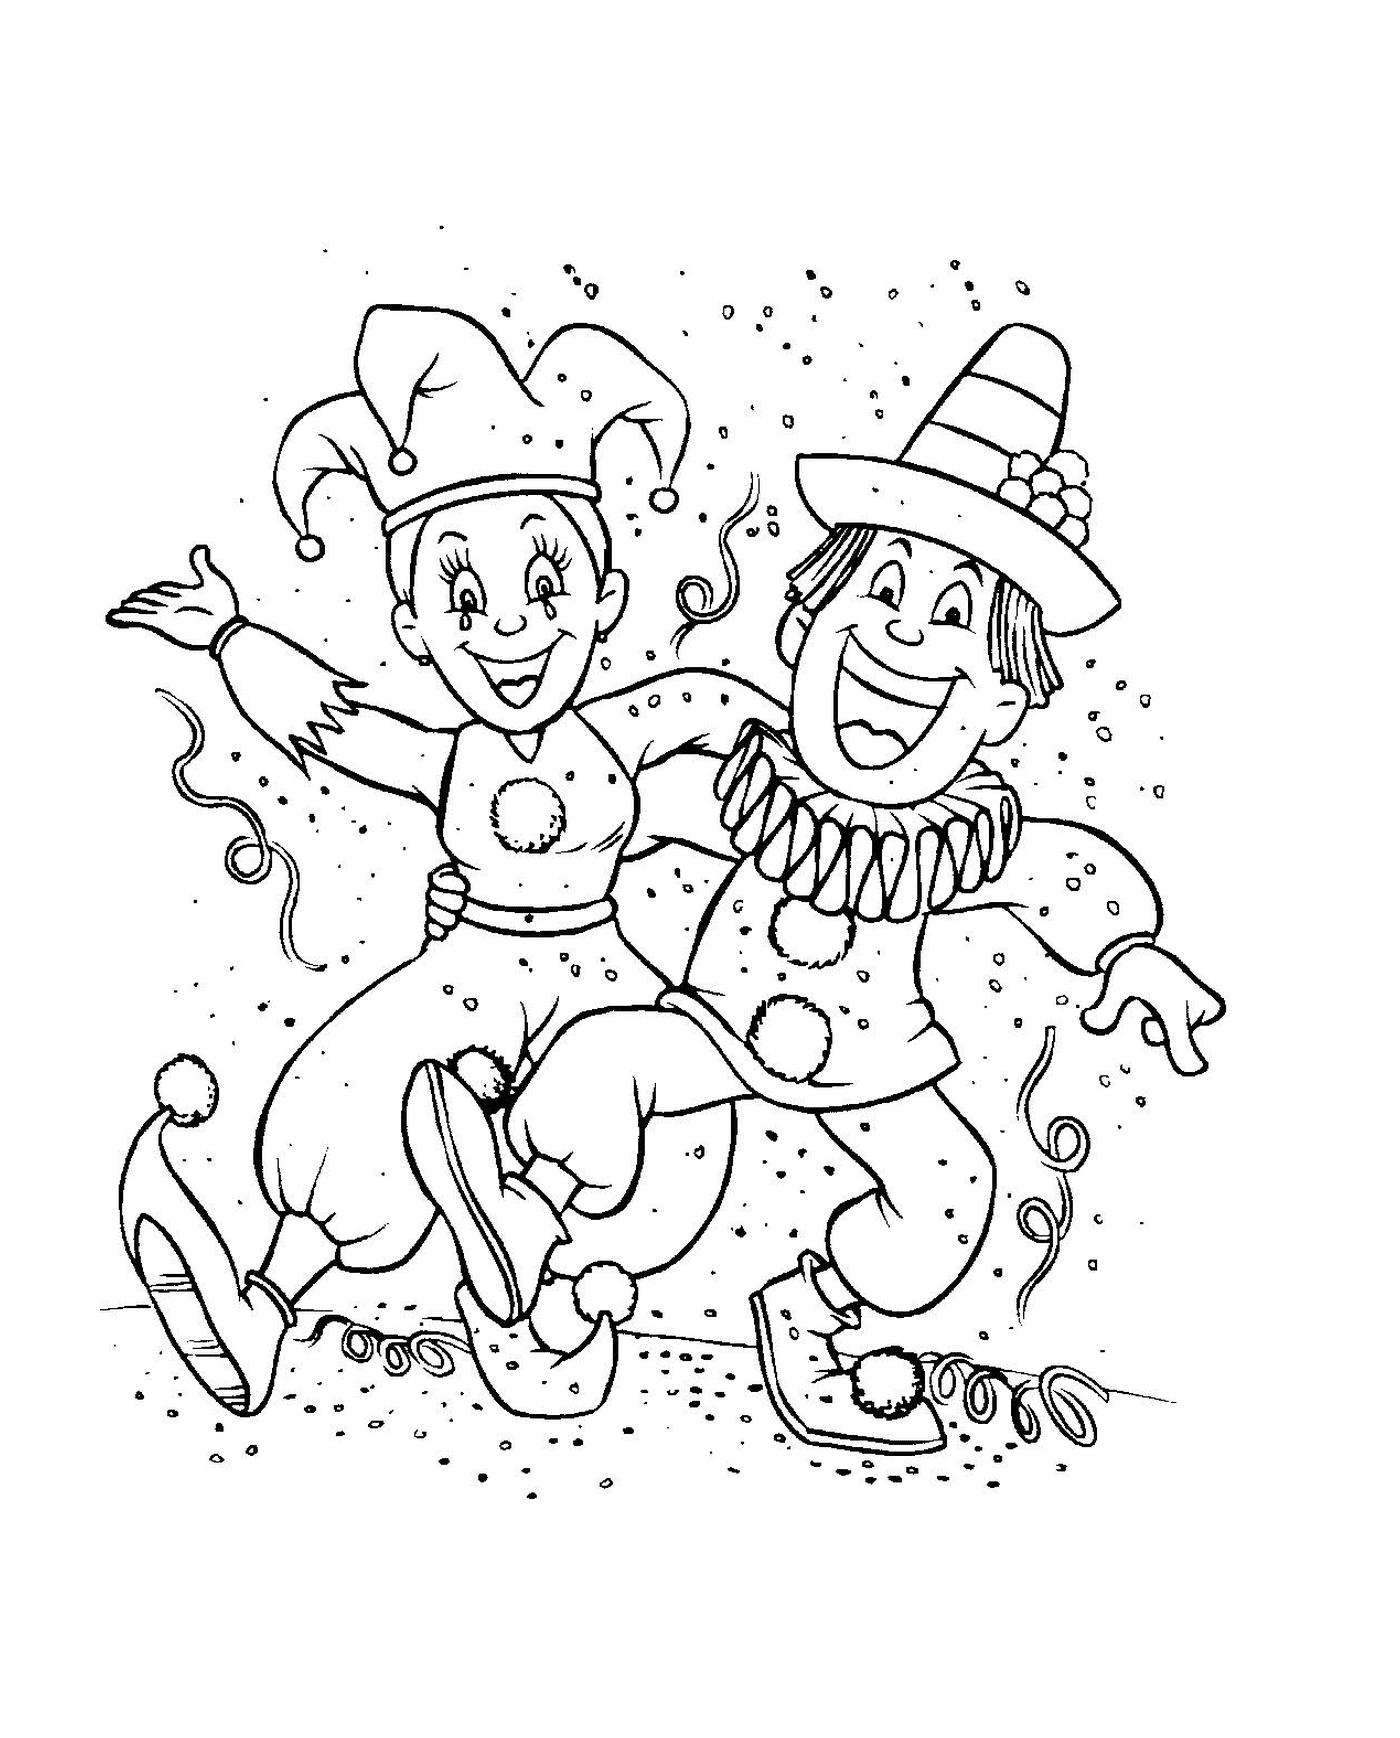  Carnival party, two clowns 